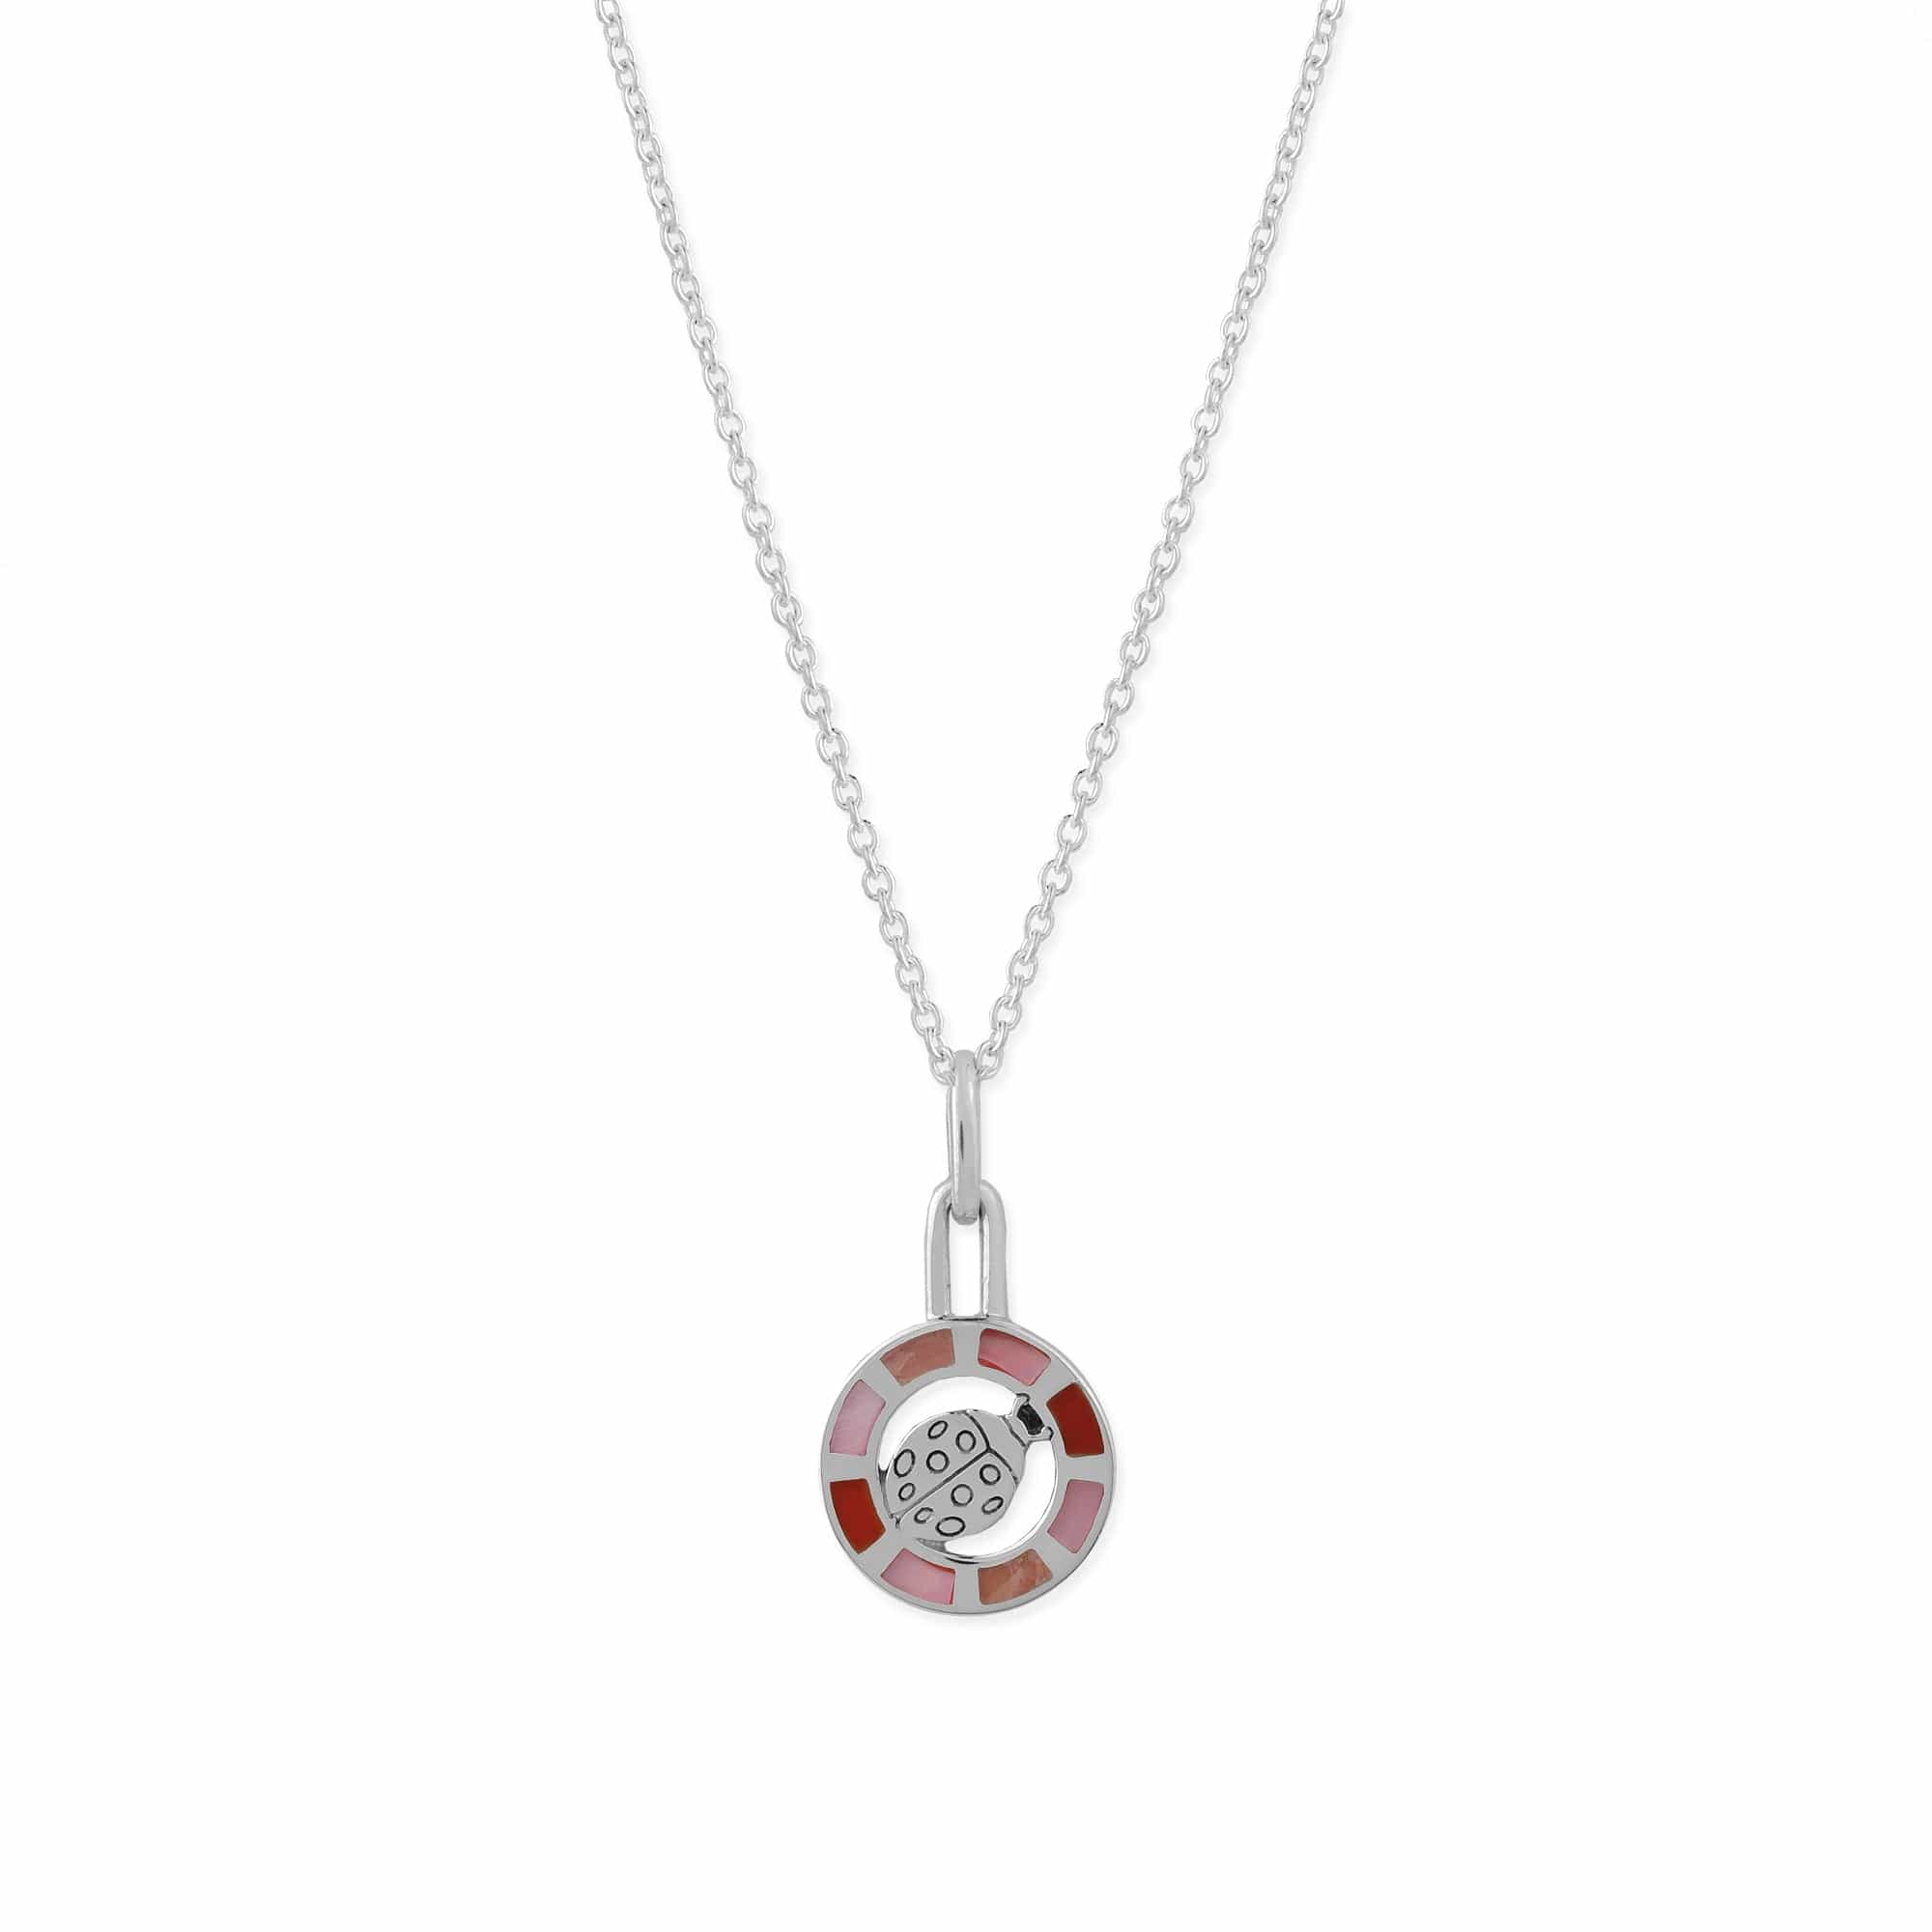 Boma Jewelry Necklaces Necklace and Charm Ladybug of Luck Charm Necklace